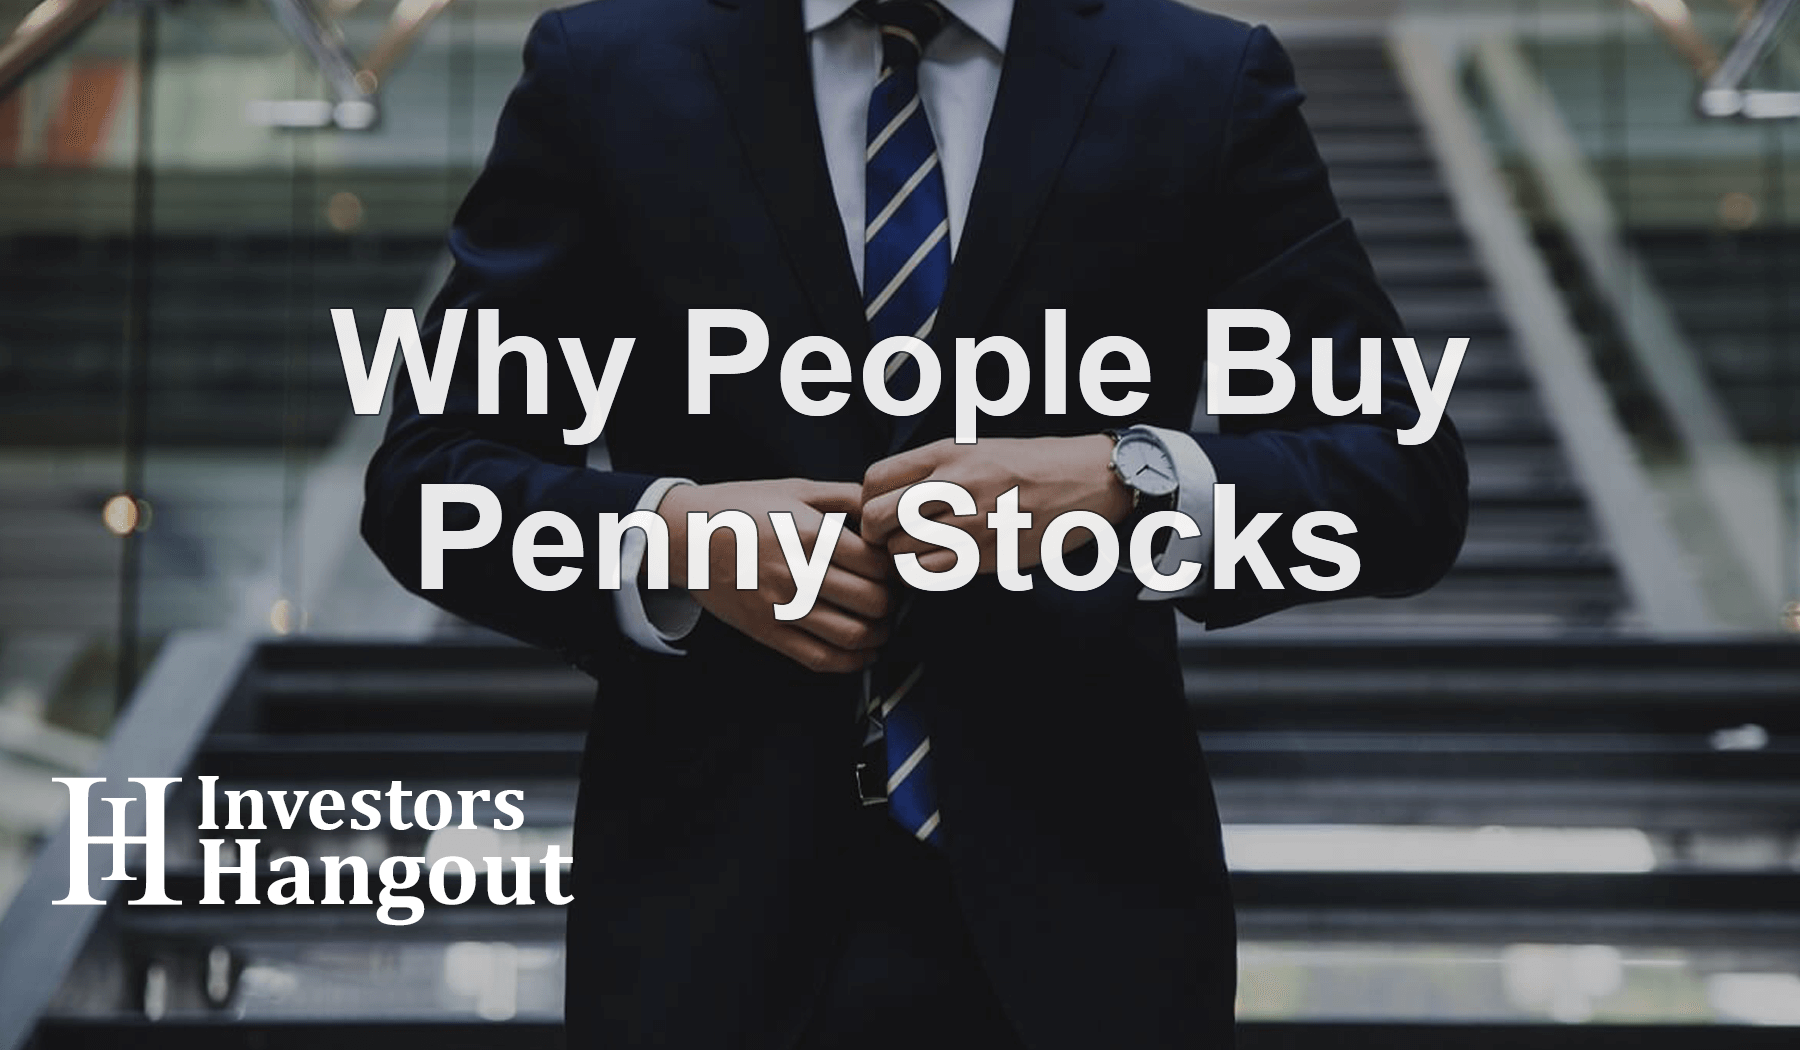 Why People Buy Penny Stocks